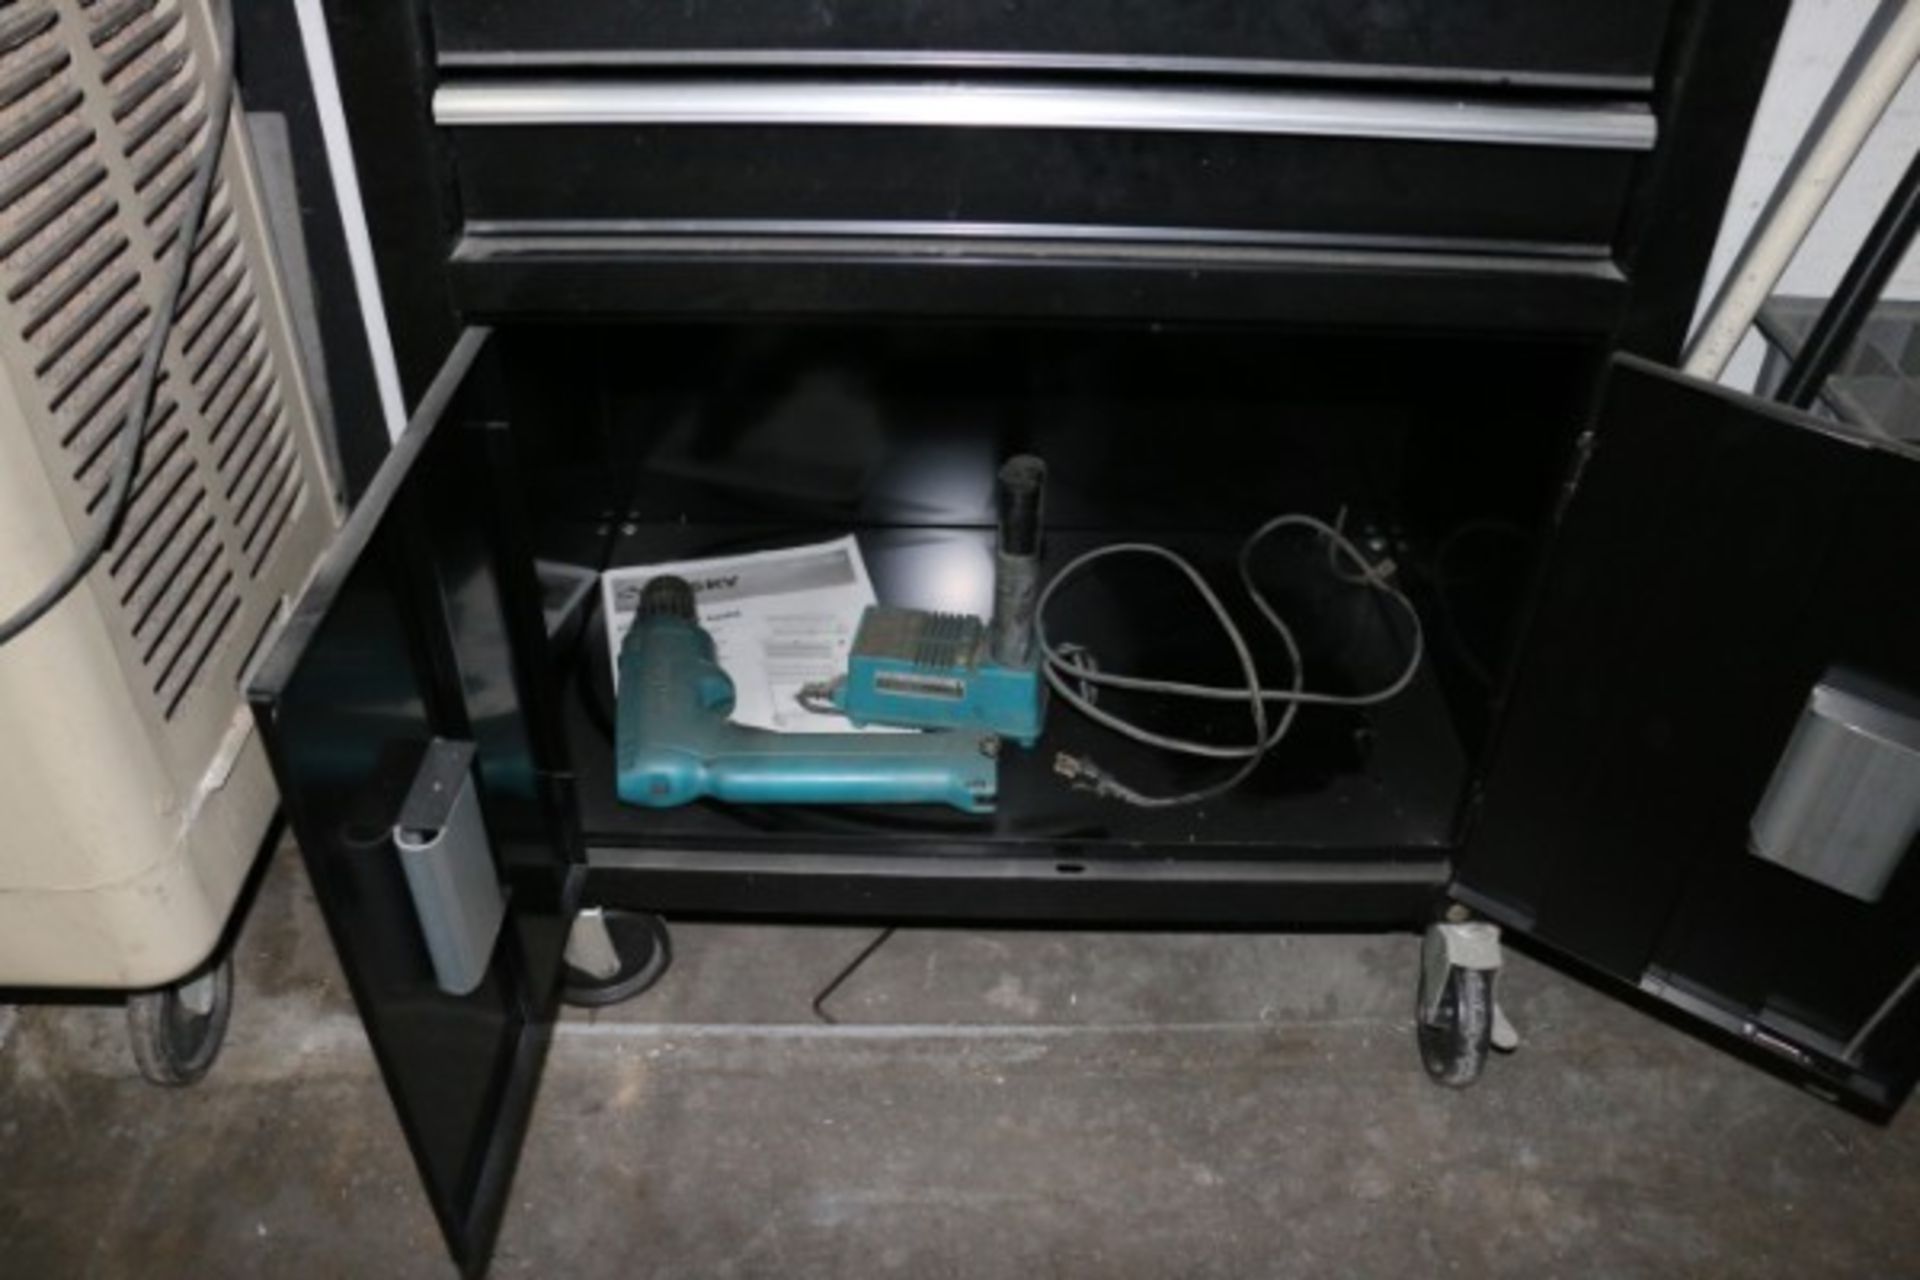 Husky Ball Bearing 6 Drawer Tool Cabinet, with Content - Image 7 of 7